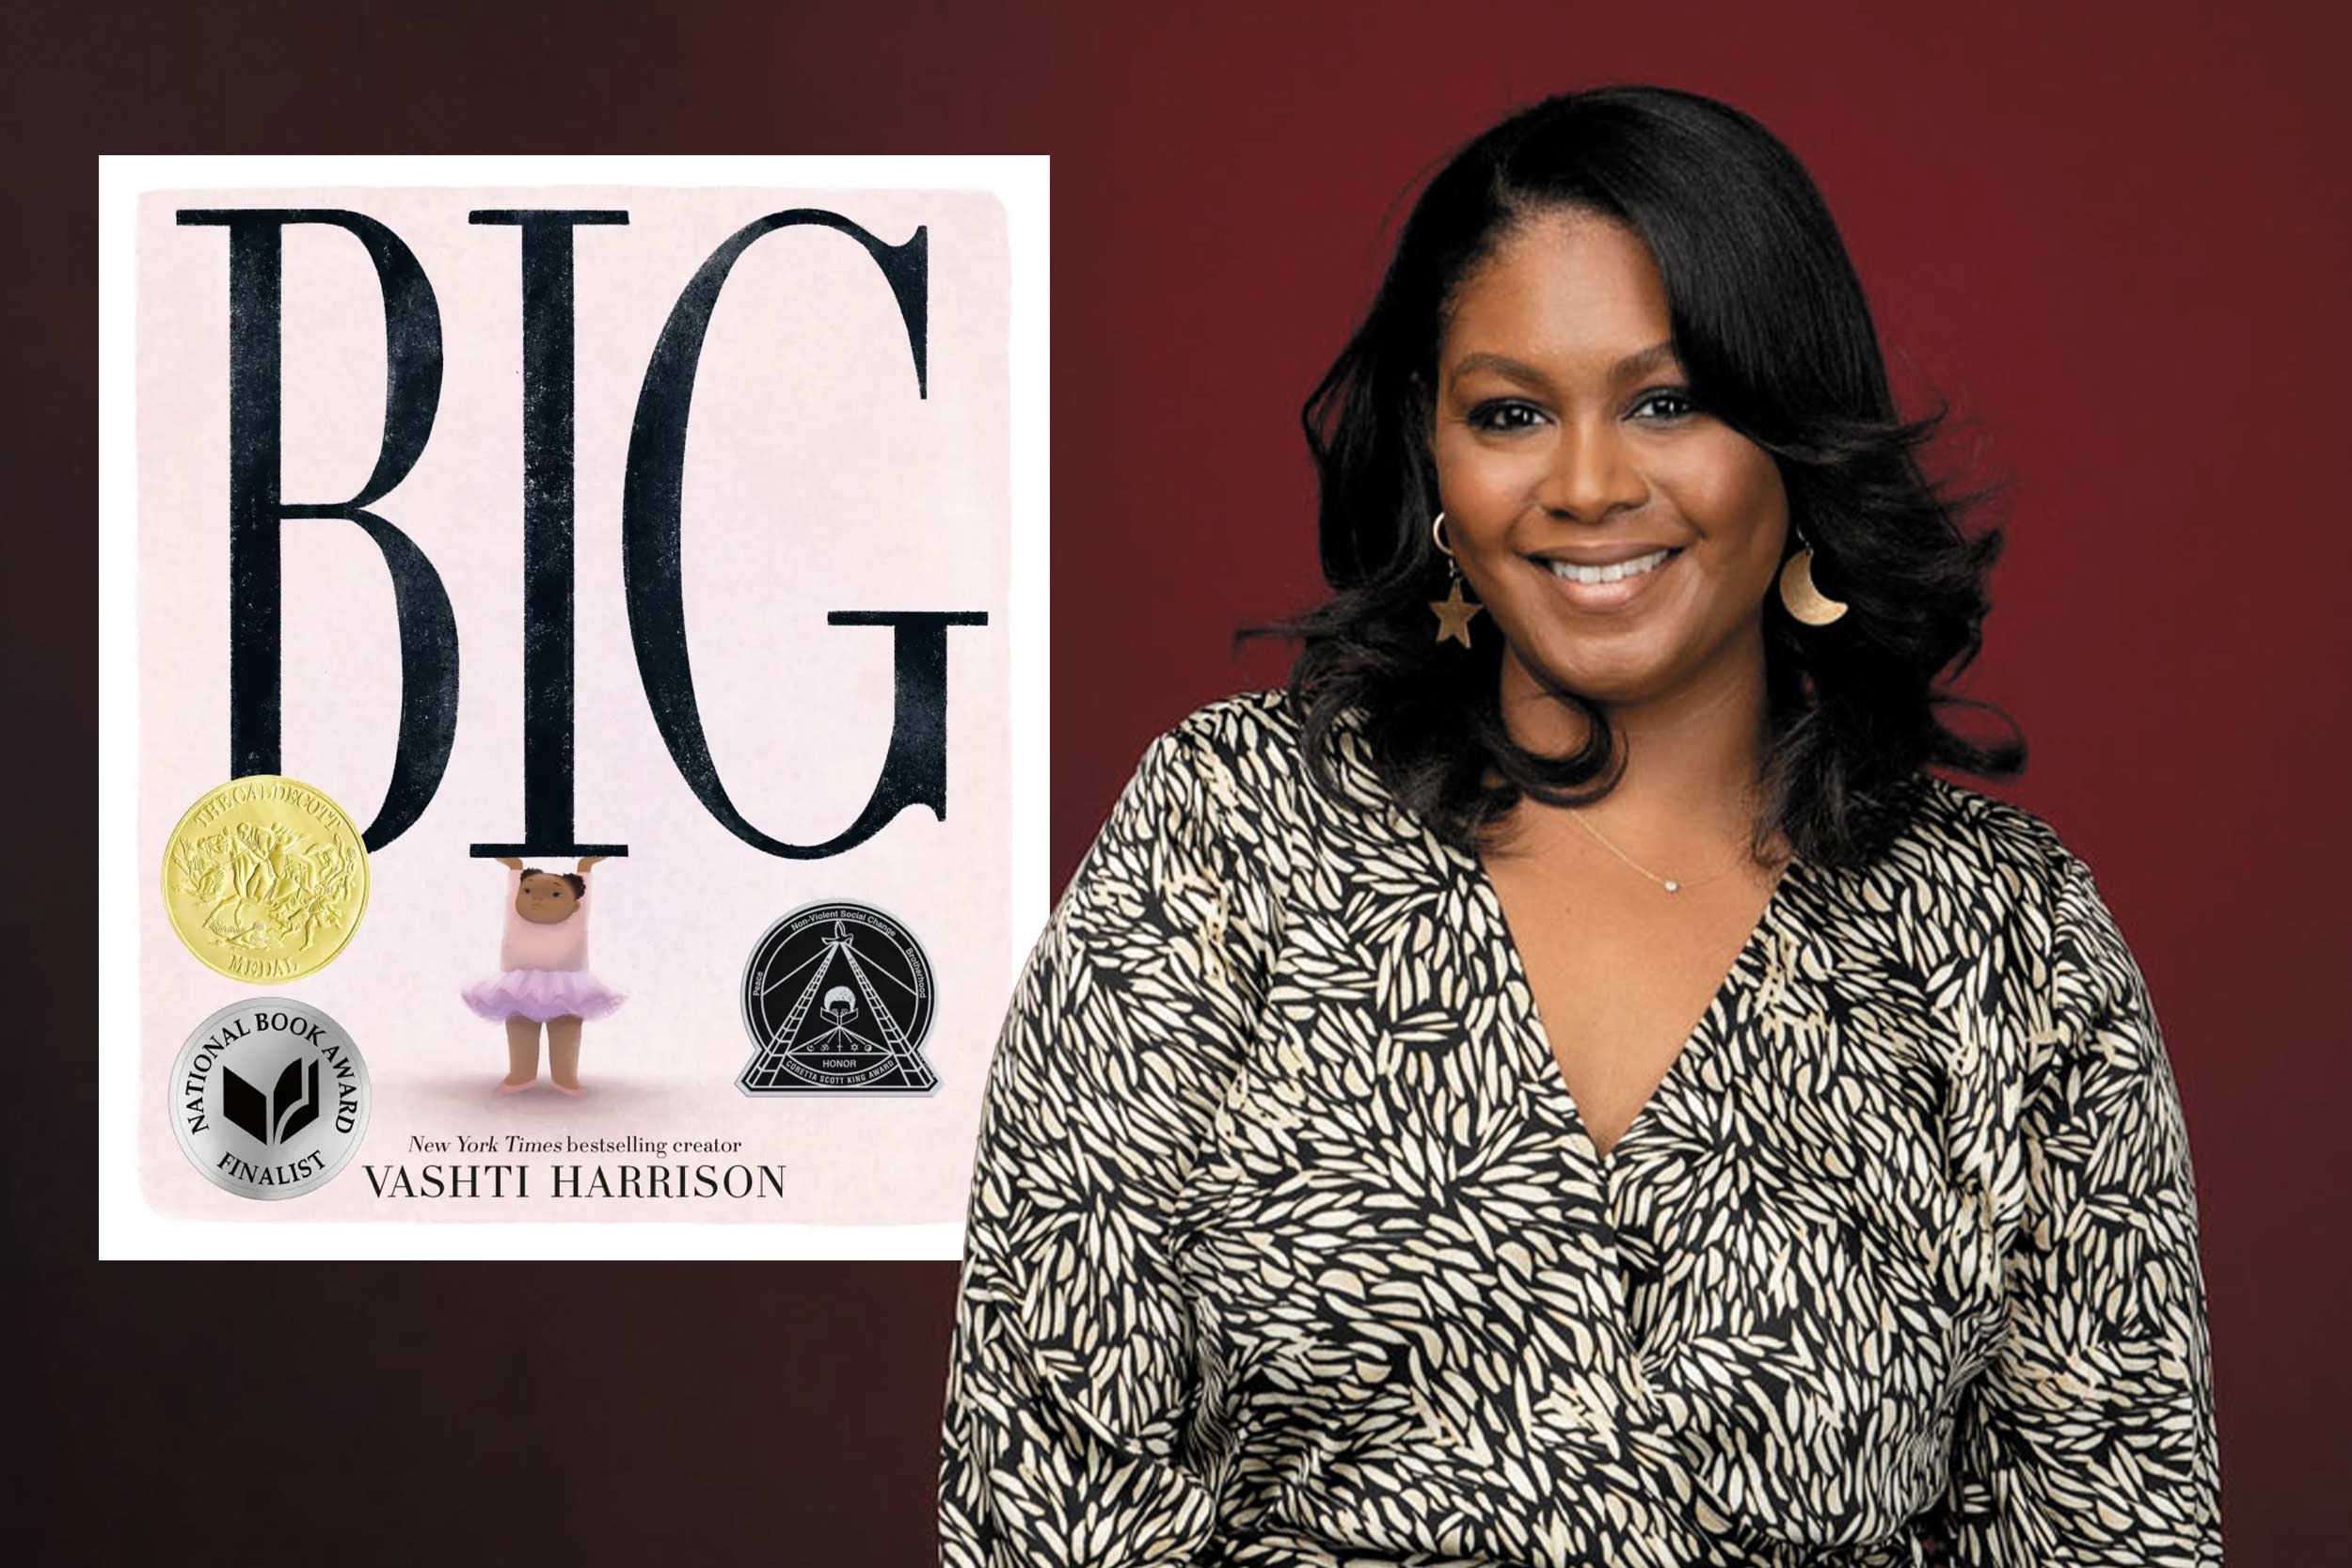 Writer Vashti Harrison smiles wearing a black-and-white-patterned shirt. Next to her is the cover of her book, "Big," which features the title in huge letters with the "I" being held up by a little girl in a pink tutu.